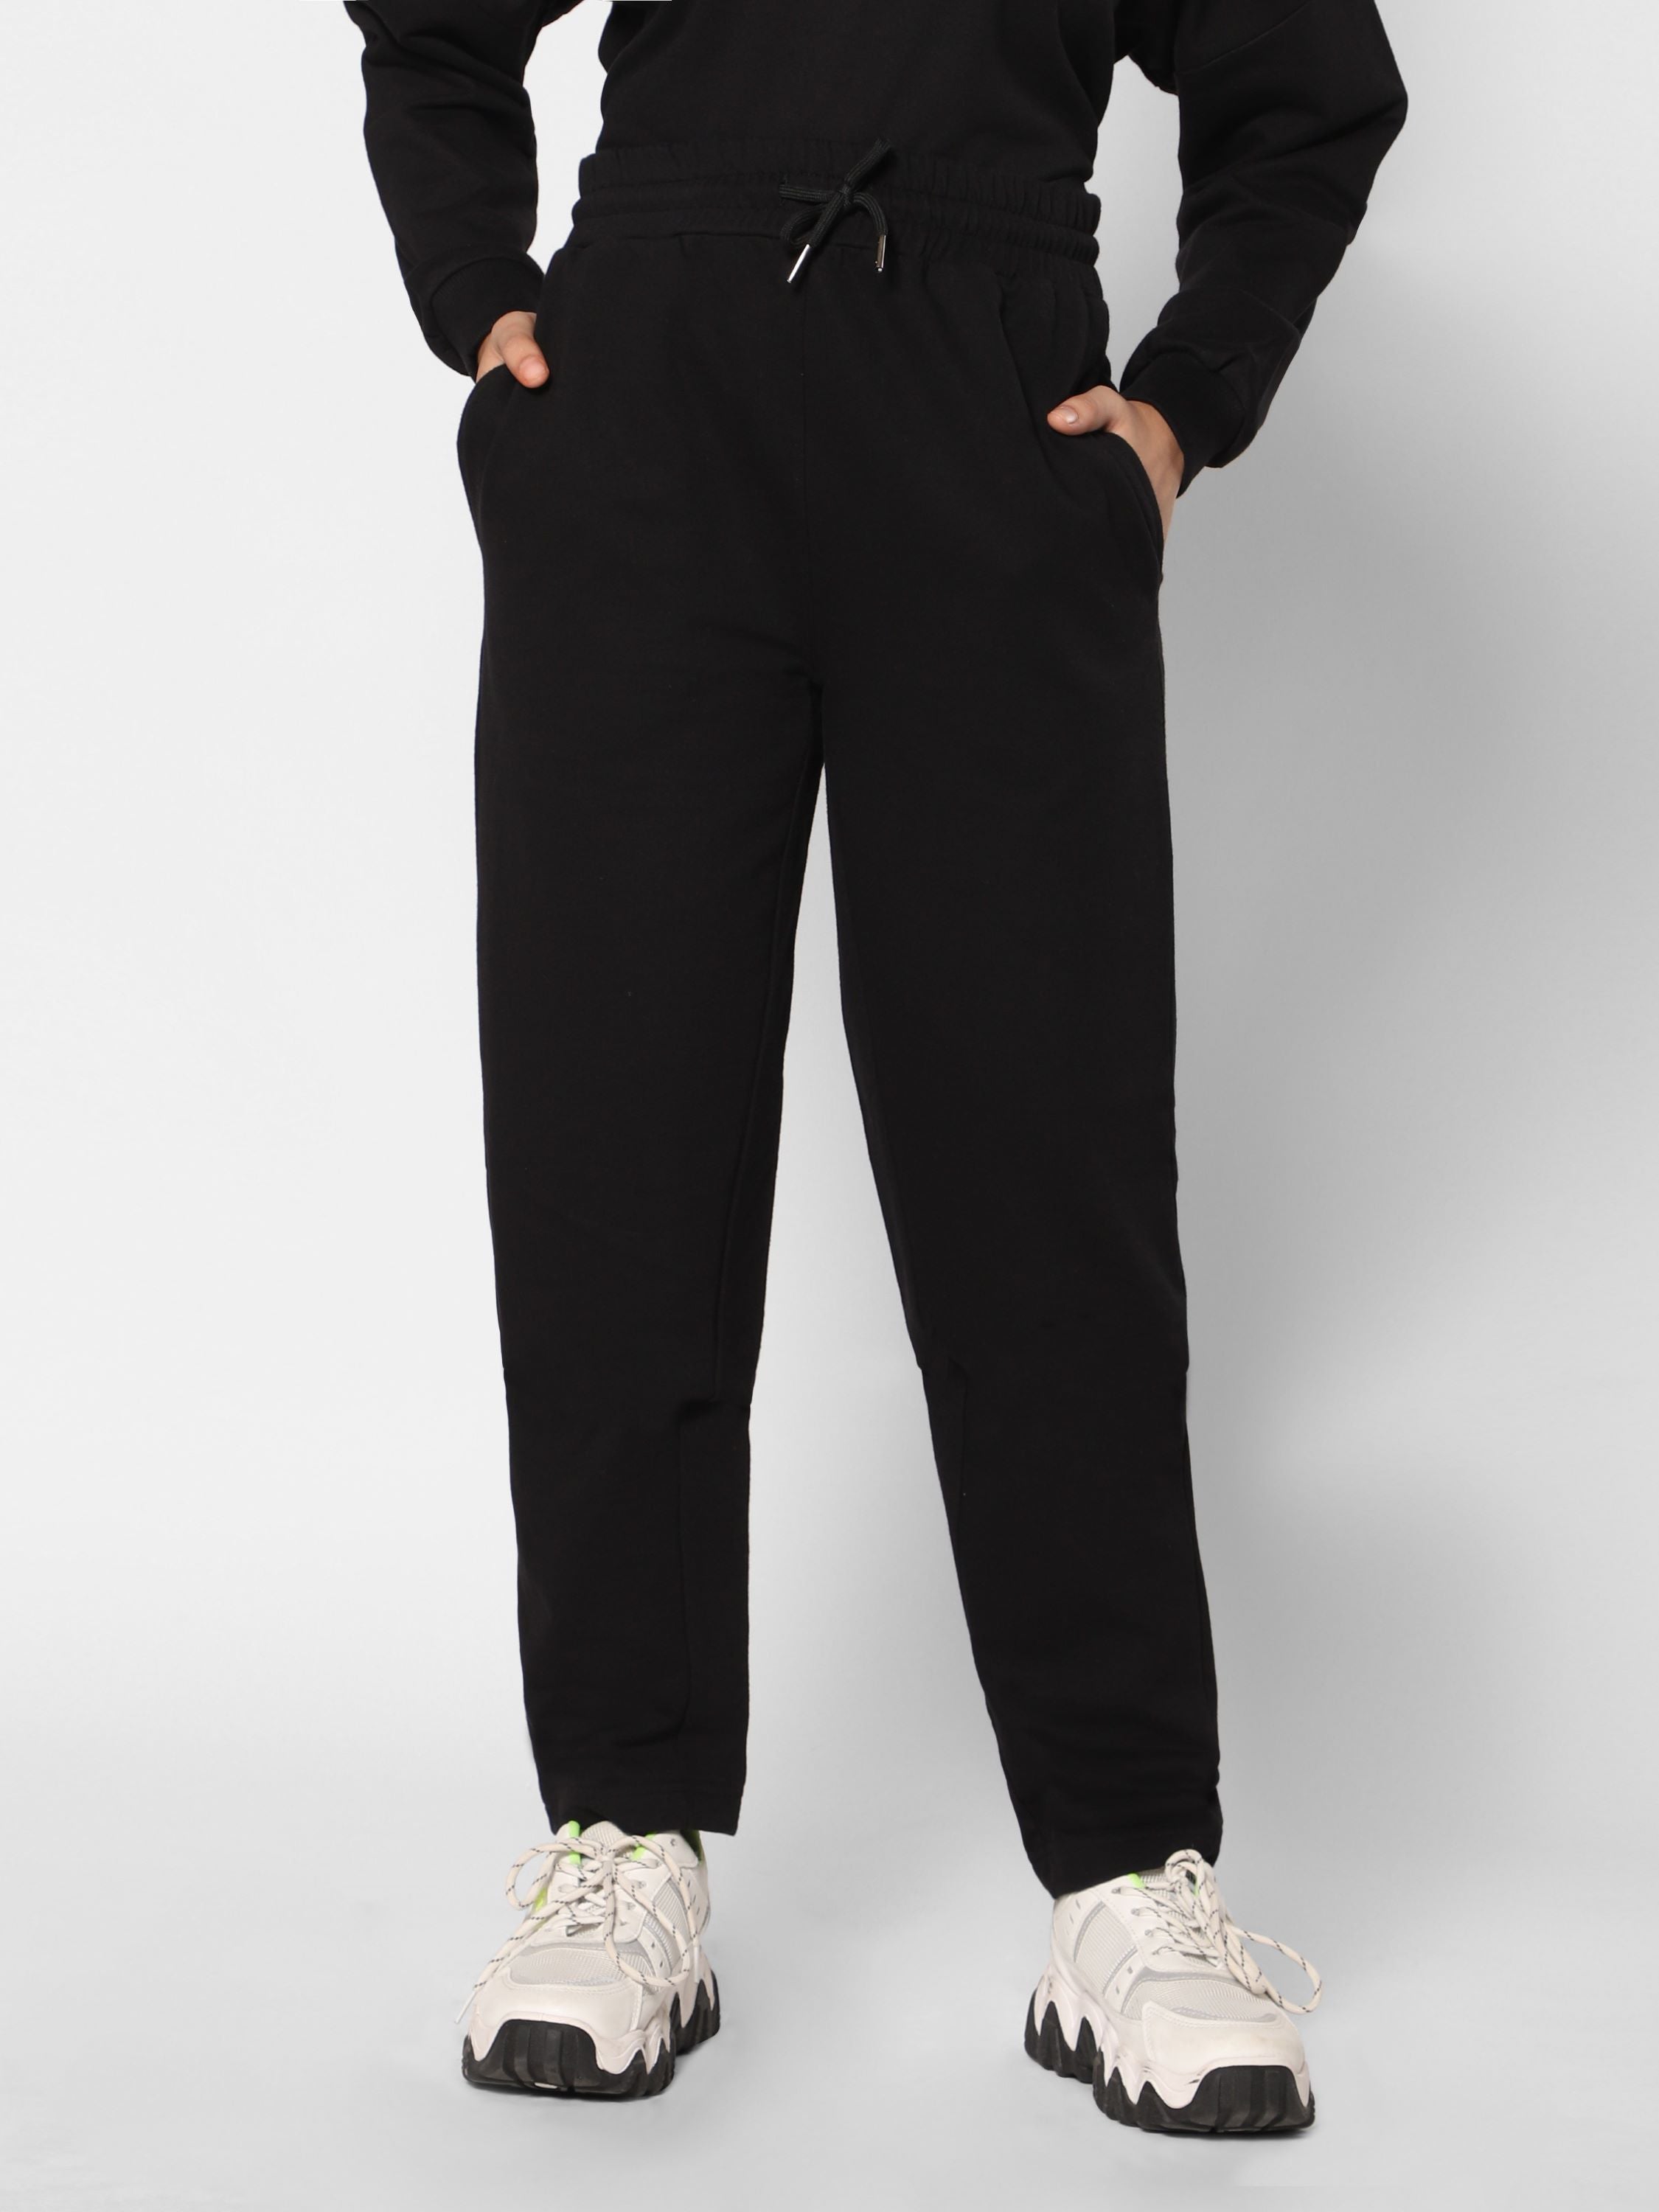 Buy Black Trousers & Pants for Girls by RIO GIRLS Online | Ajio.com